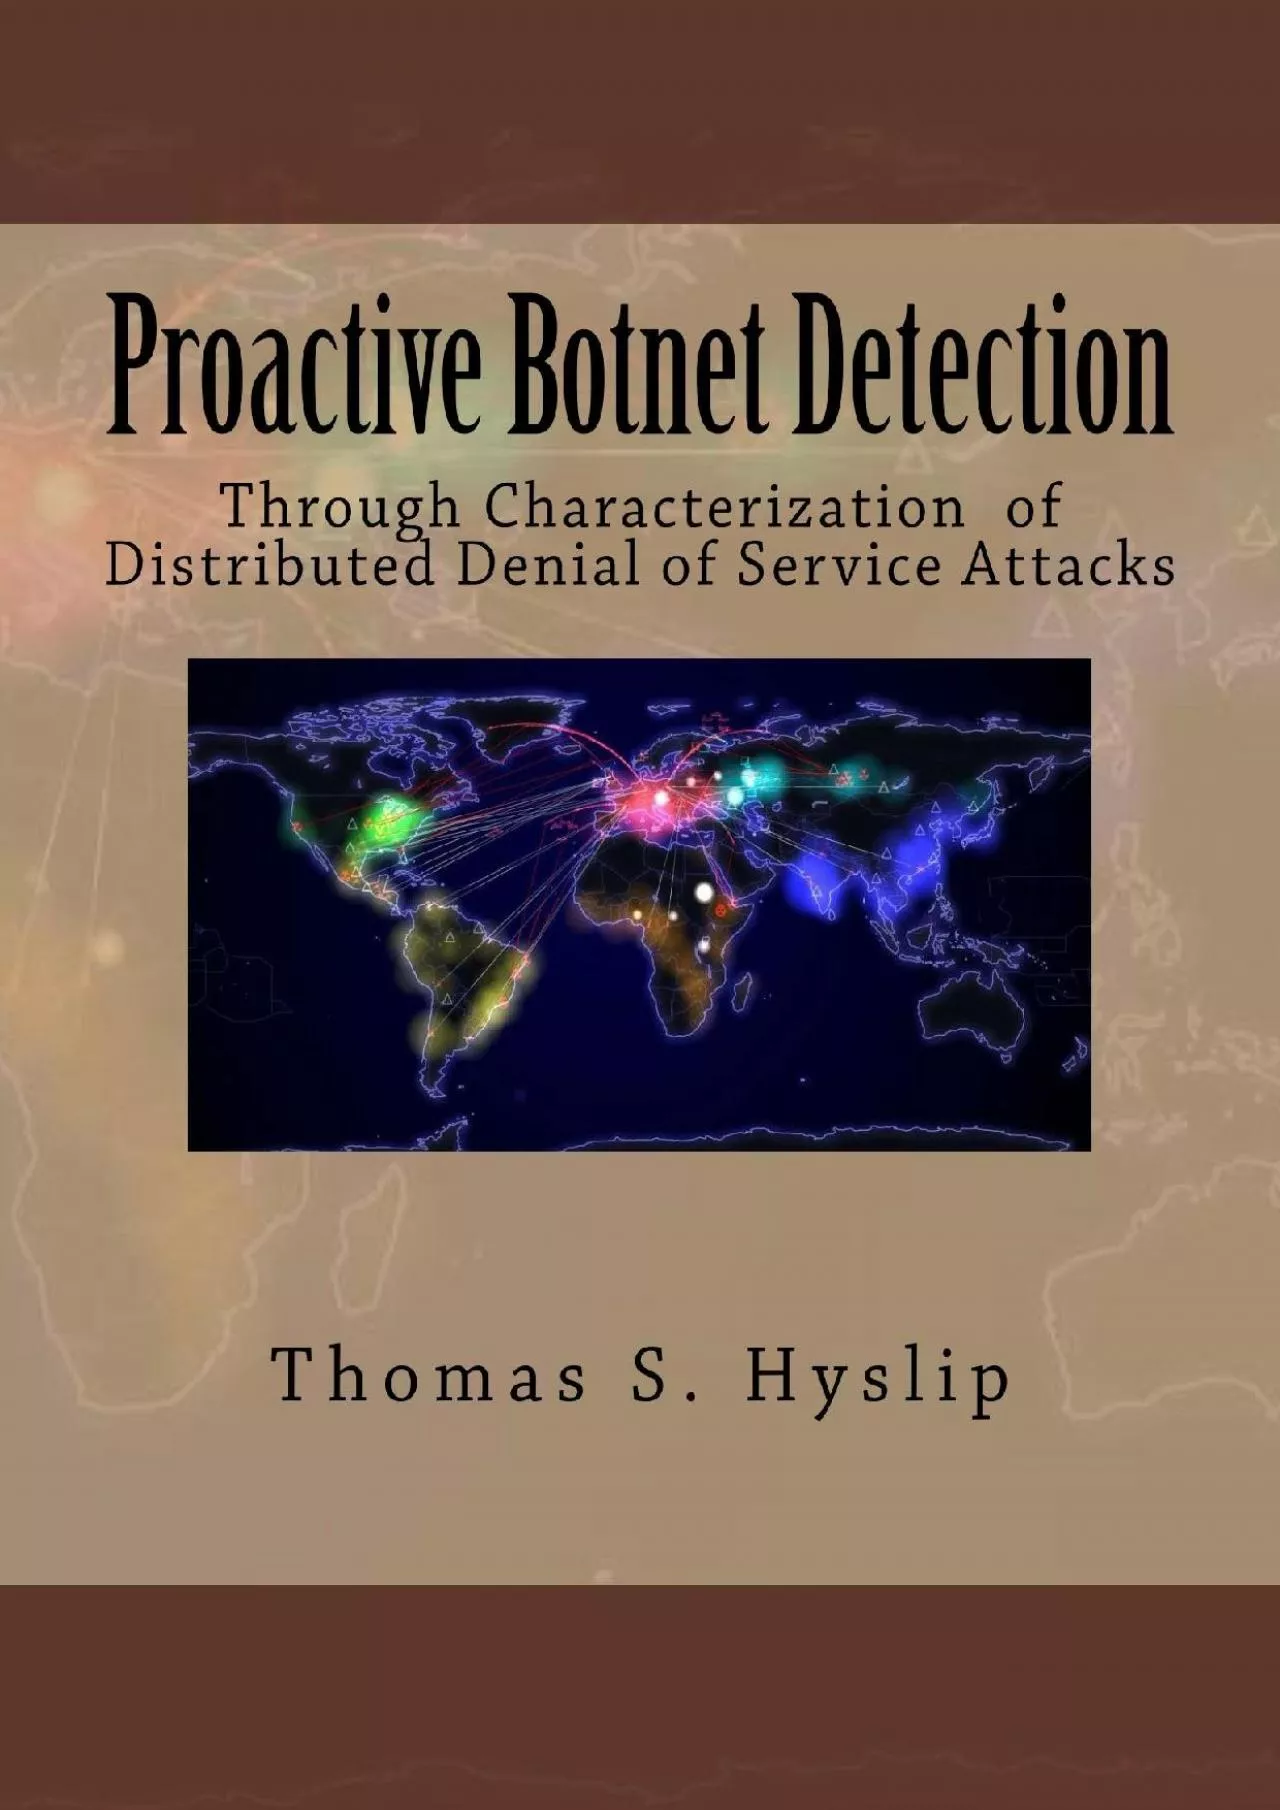 [DOWLOAD]-Proactive Botnet Detection: Through Characterization of Distributed Denial of